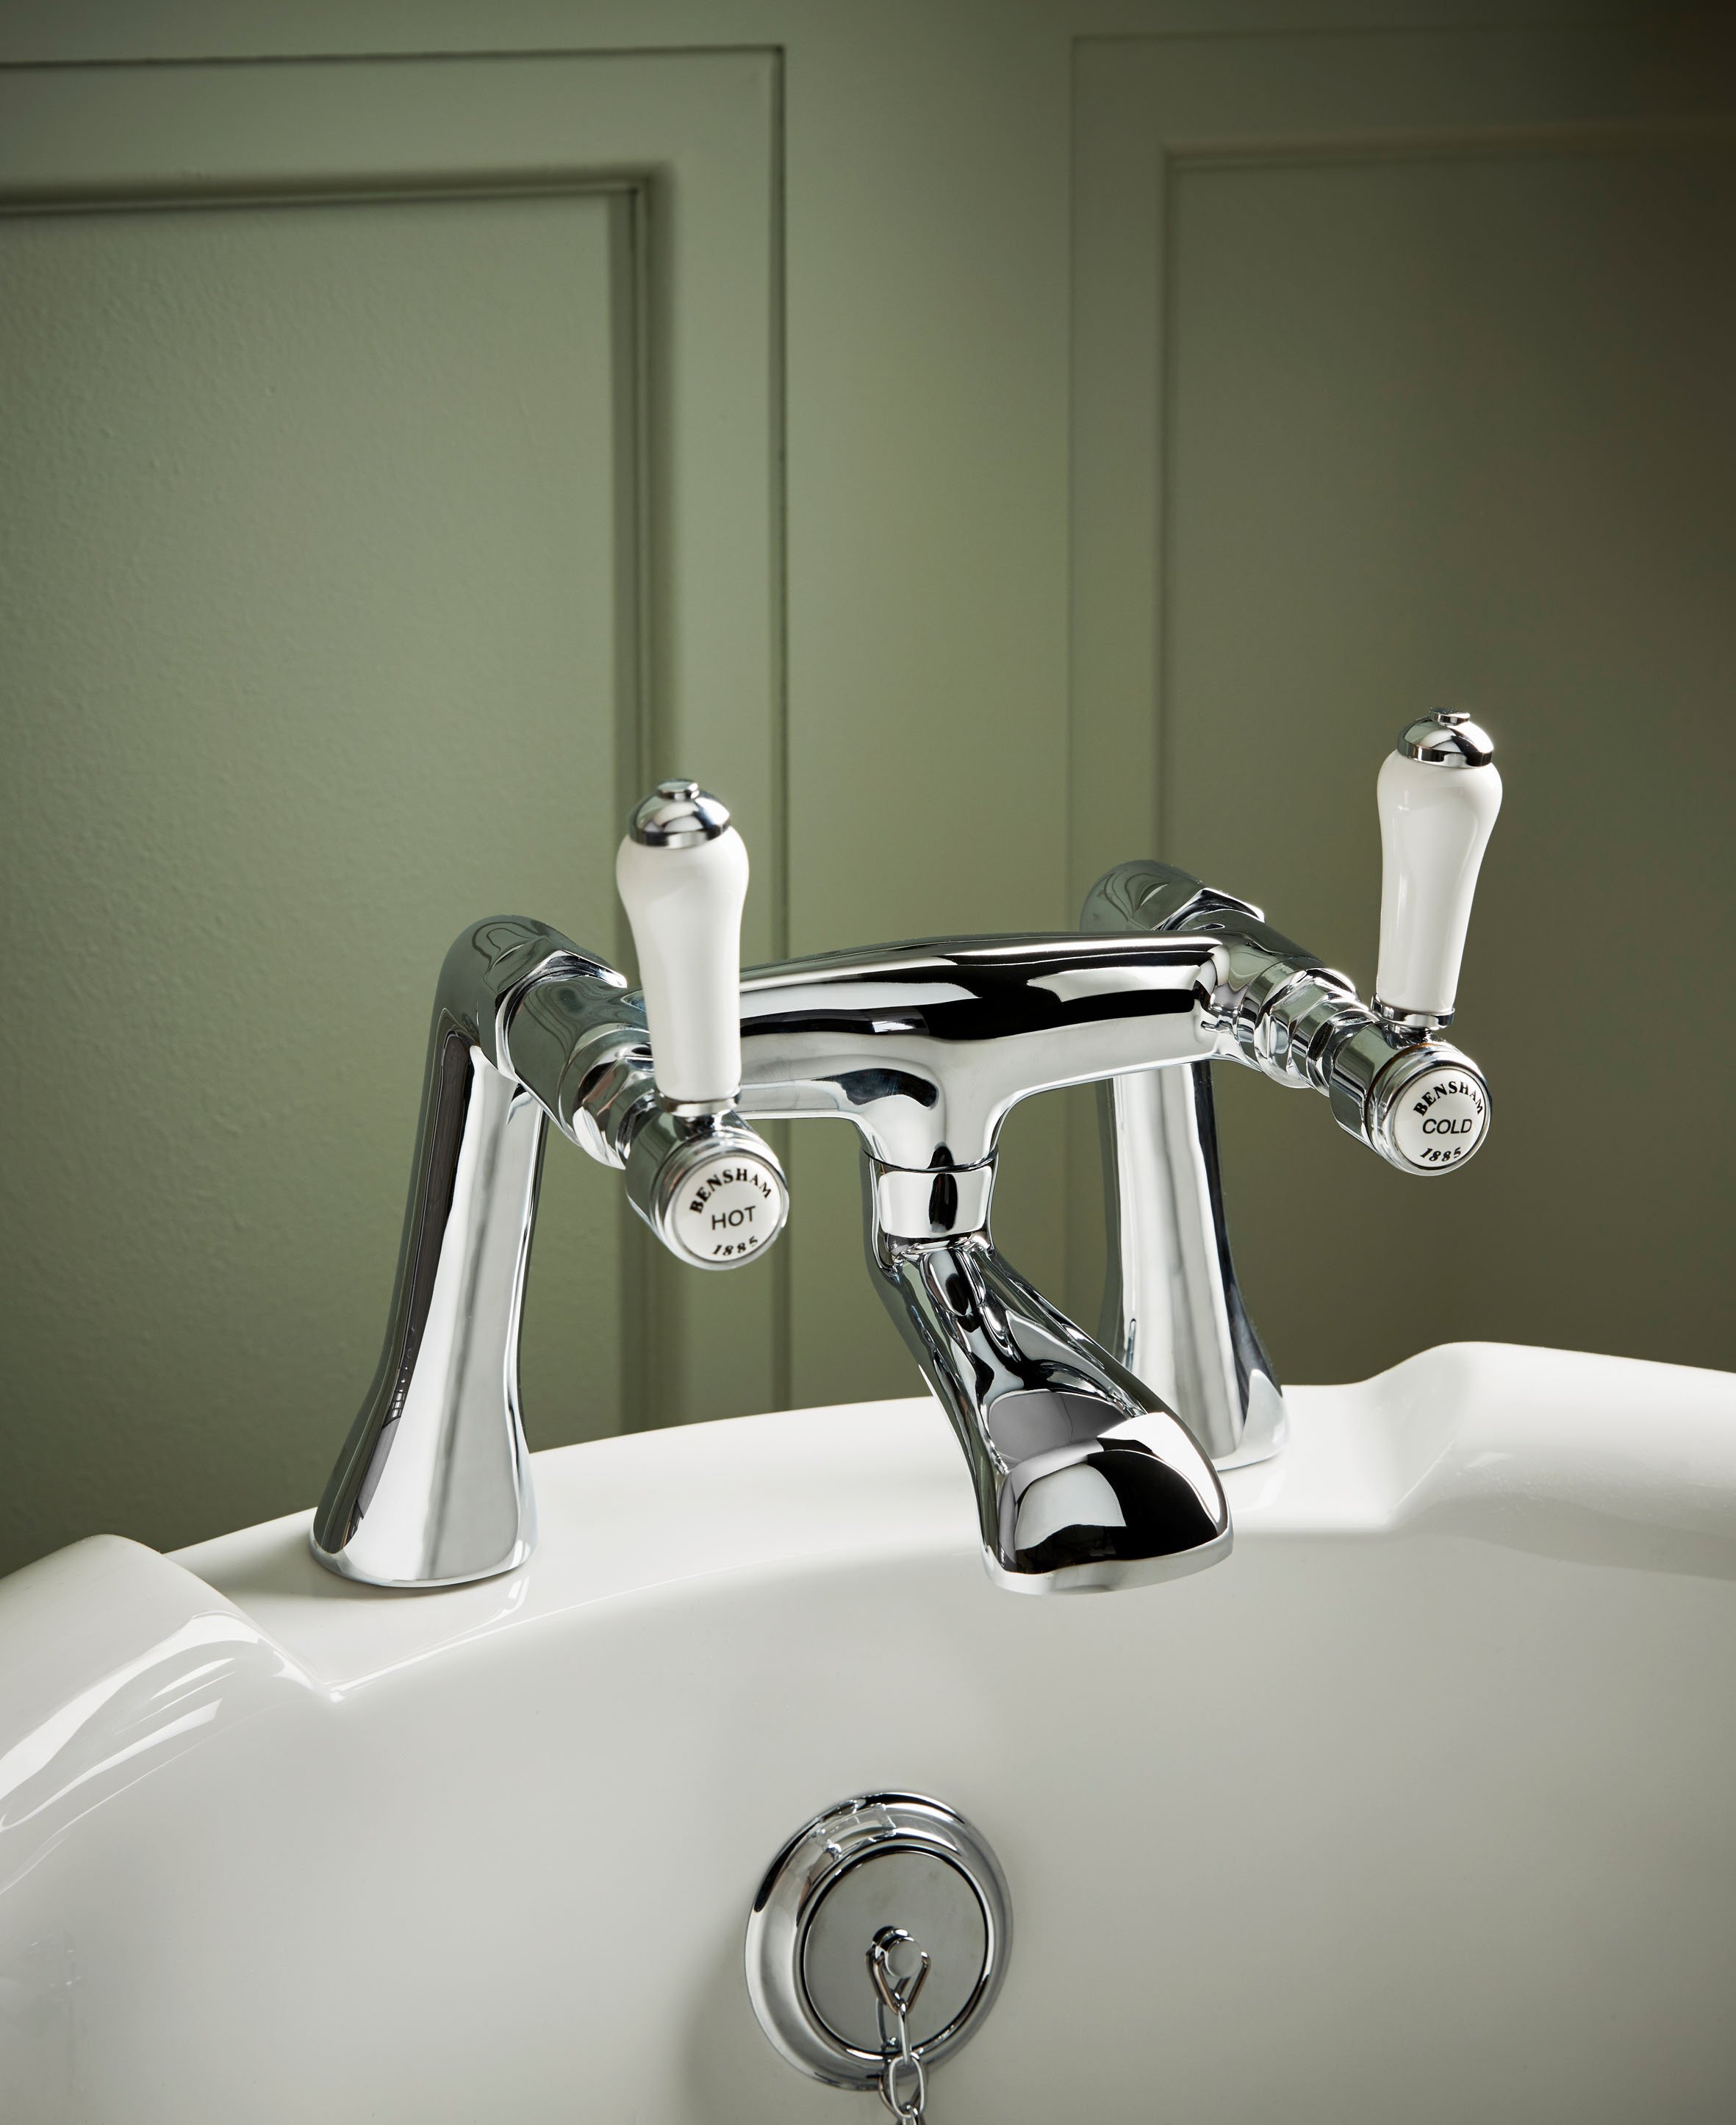 I'm Looking for a Bath Tap... What Are My Options?